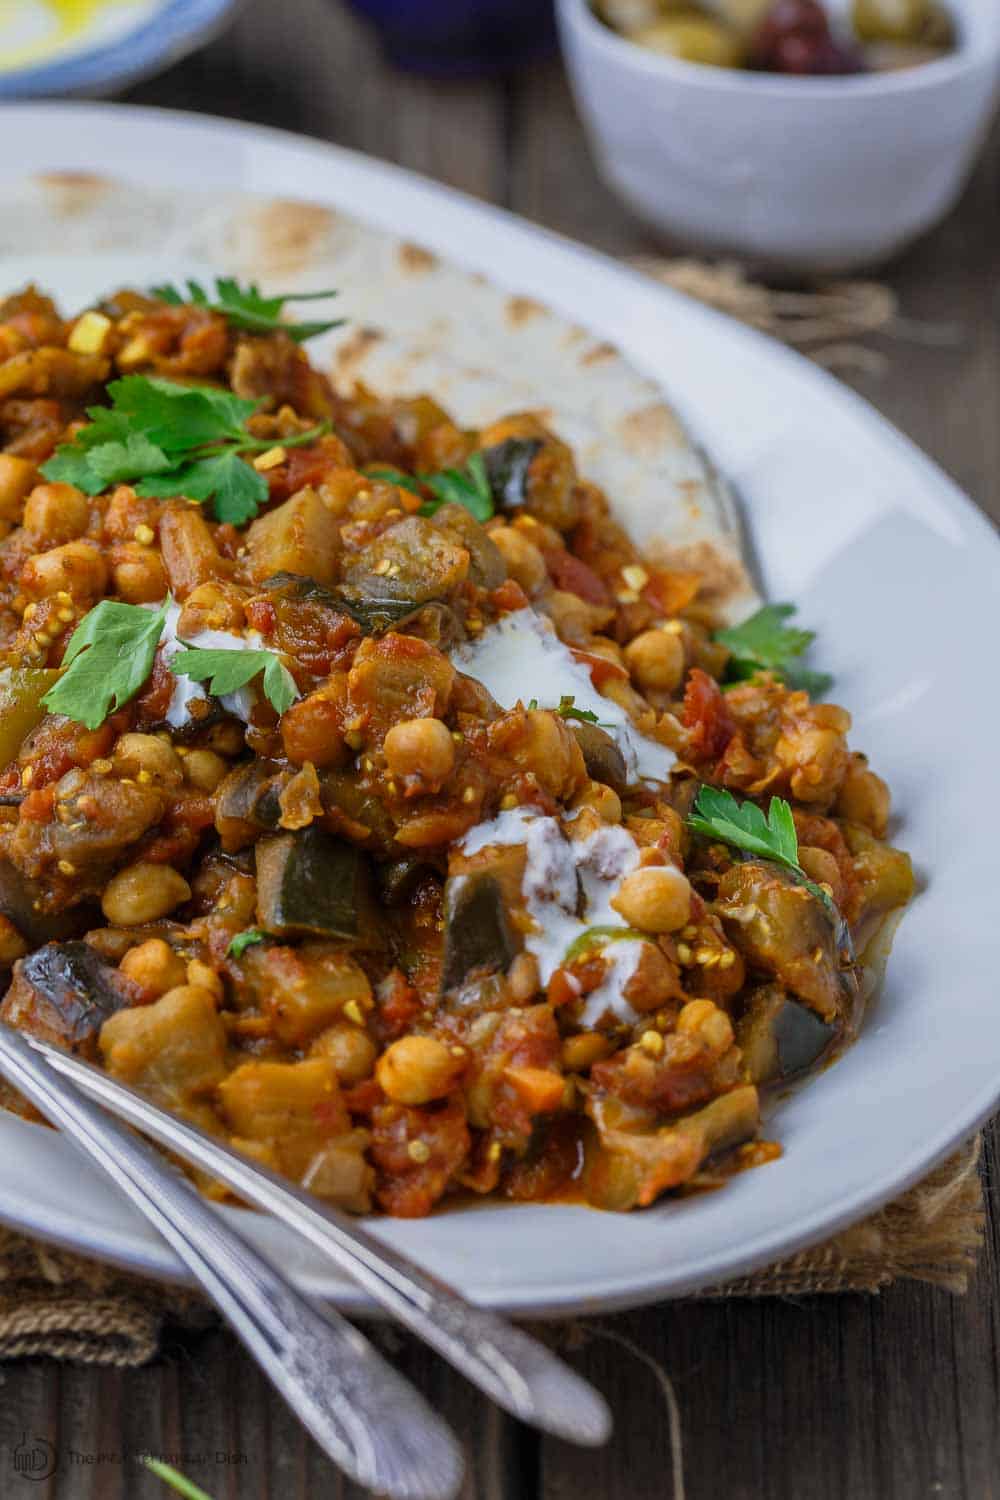 Greek Style Braised Eggplant Recipe | The Mediterranean Dish.All star braised eggplant recipe, prepared Greek style! Eggplants cooked to velvety tender perfection with chickpeas and tomato with aromatics and a few awesome spices. A perfectly satisfying meatless dinner or side dish. Vegan. Gluten Free. #meatless #eggplantrecipe #chickpearecipe #mediterraneandiet #greekfood #veganrecipe #glutenfreerecipe #chickpeas #eggplant #meatlessdinner #onepot #easyrecipes #healthyrecipe #vegetarian